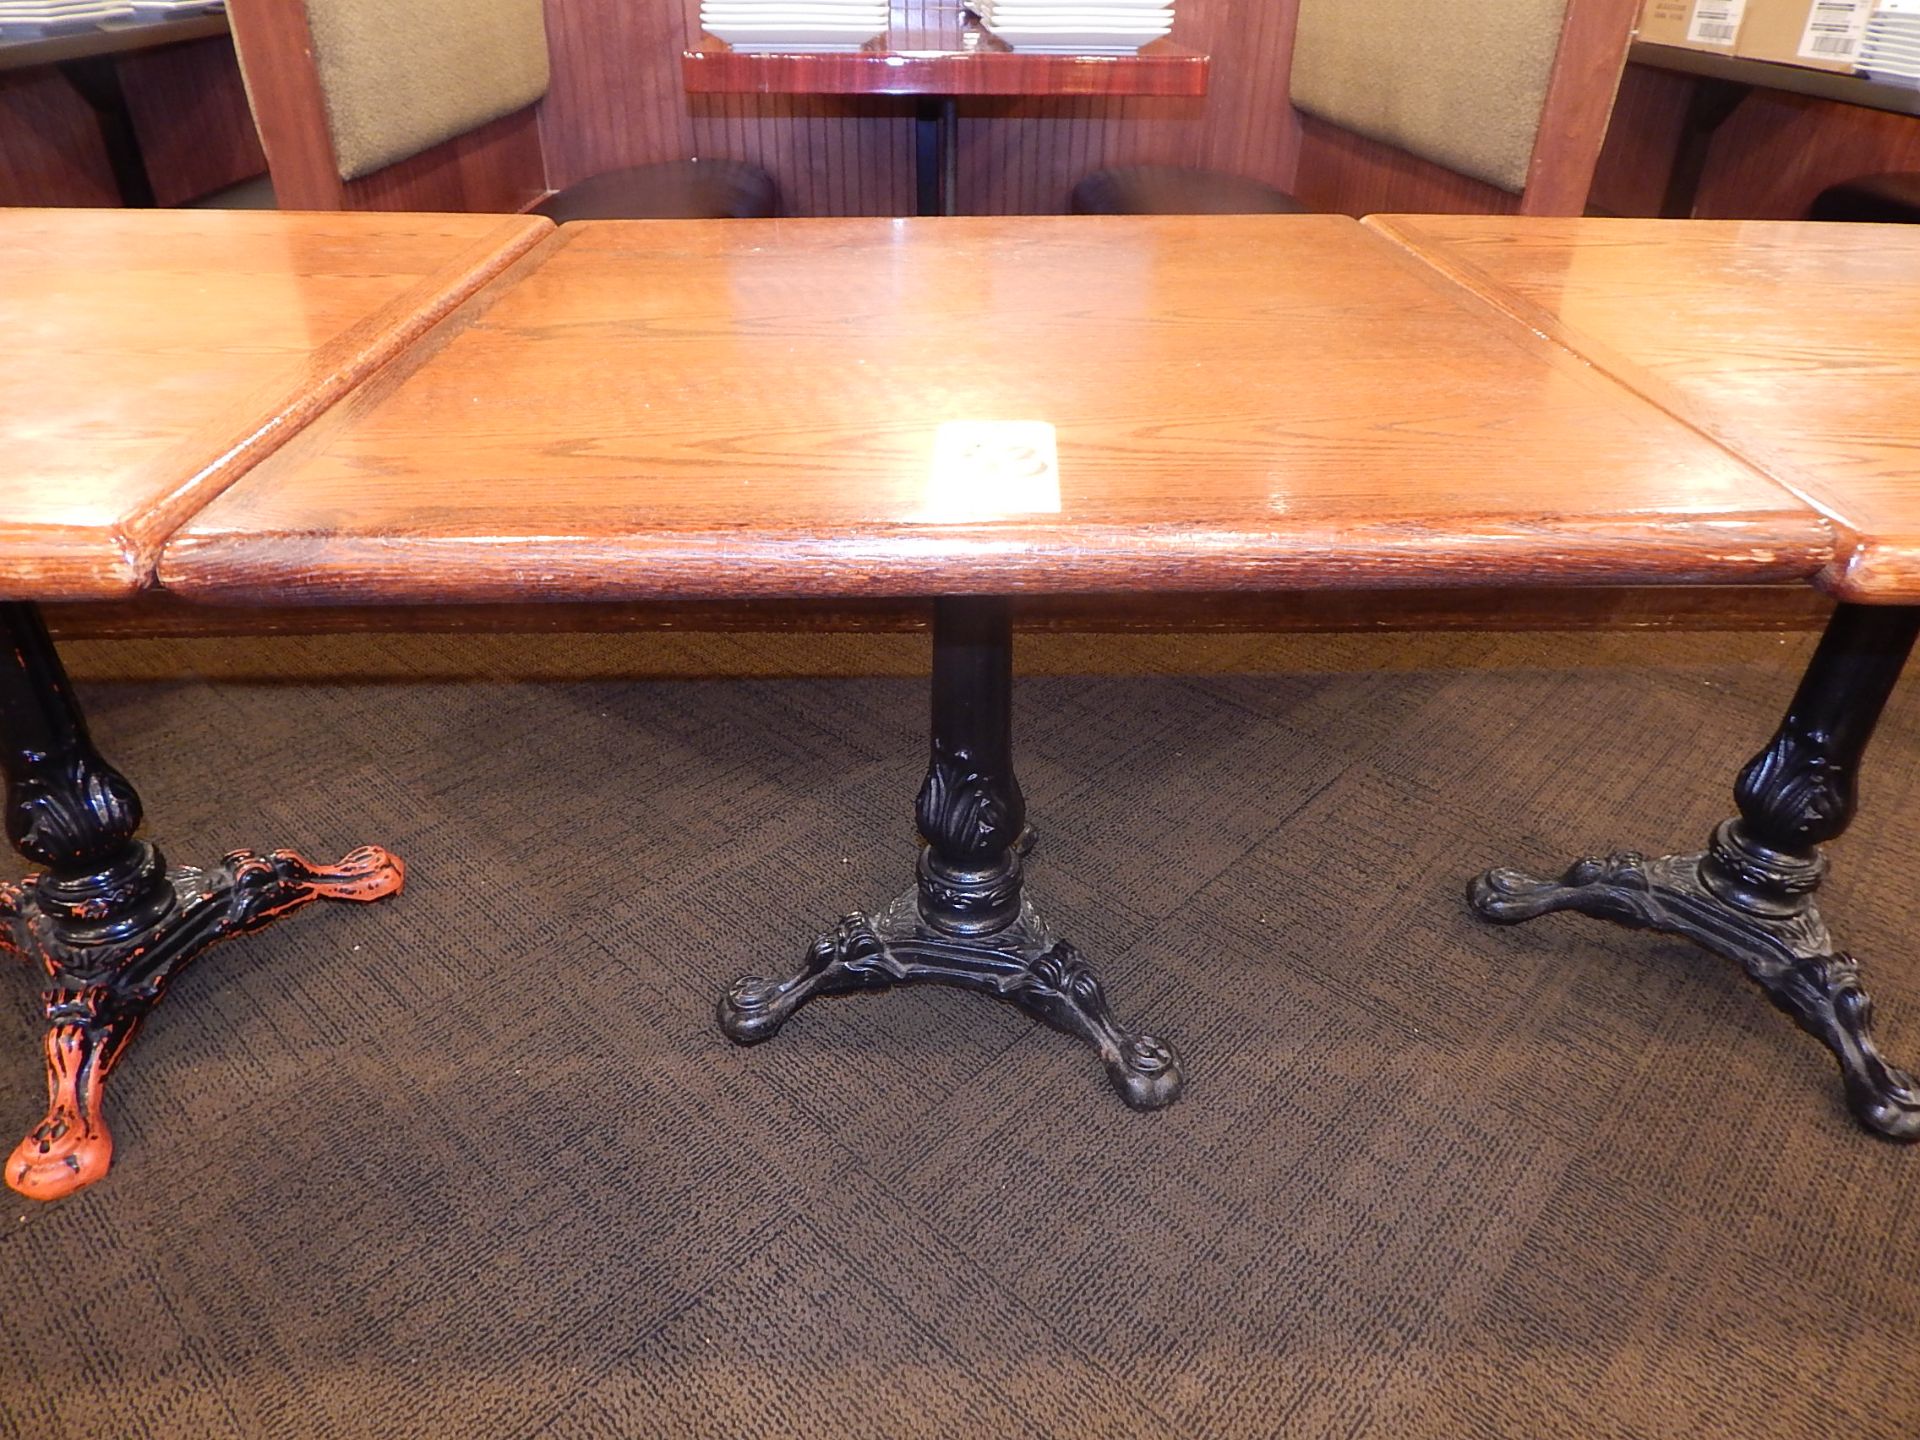 Square Wood-Top Table with Cast Iron Claw Foot Pedestal Base, 36" x 36"